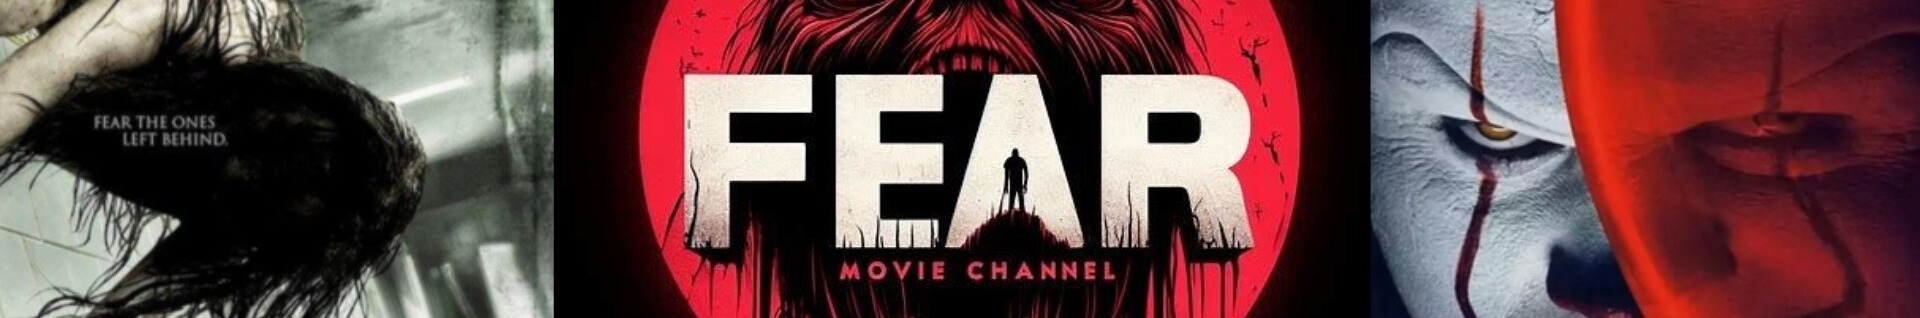 fear movies